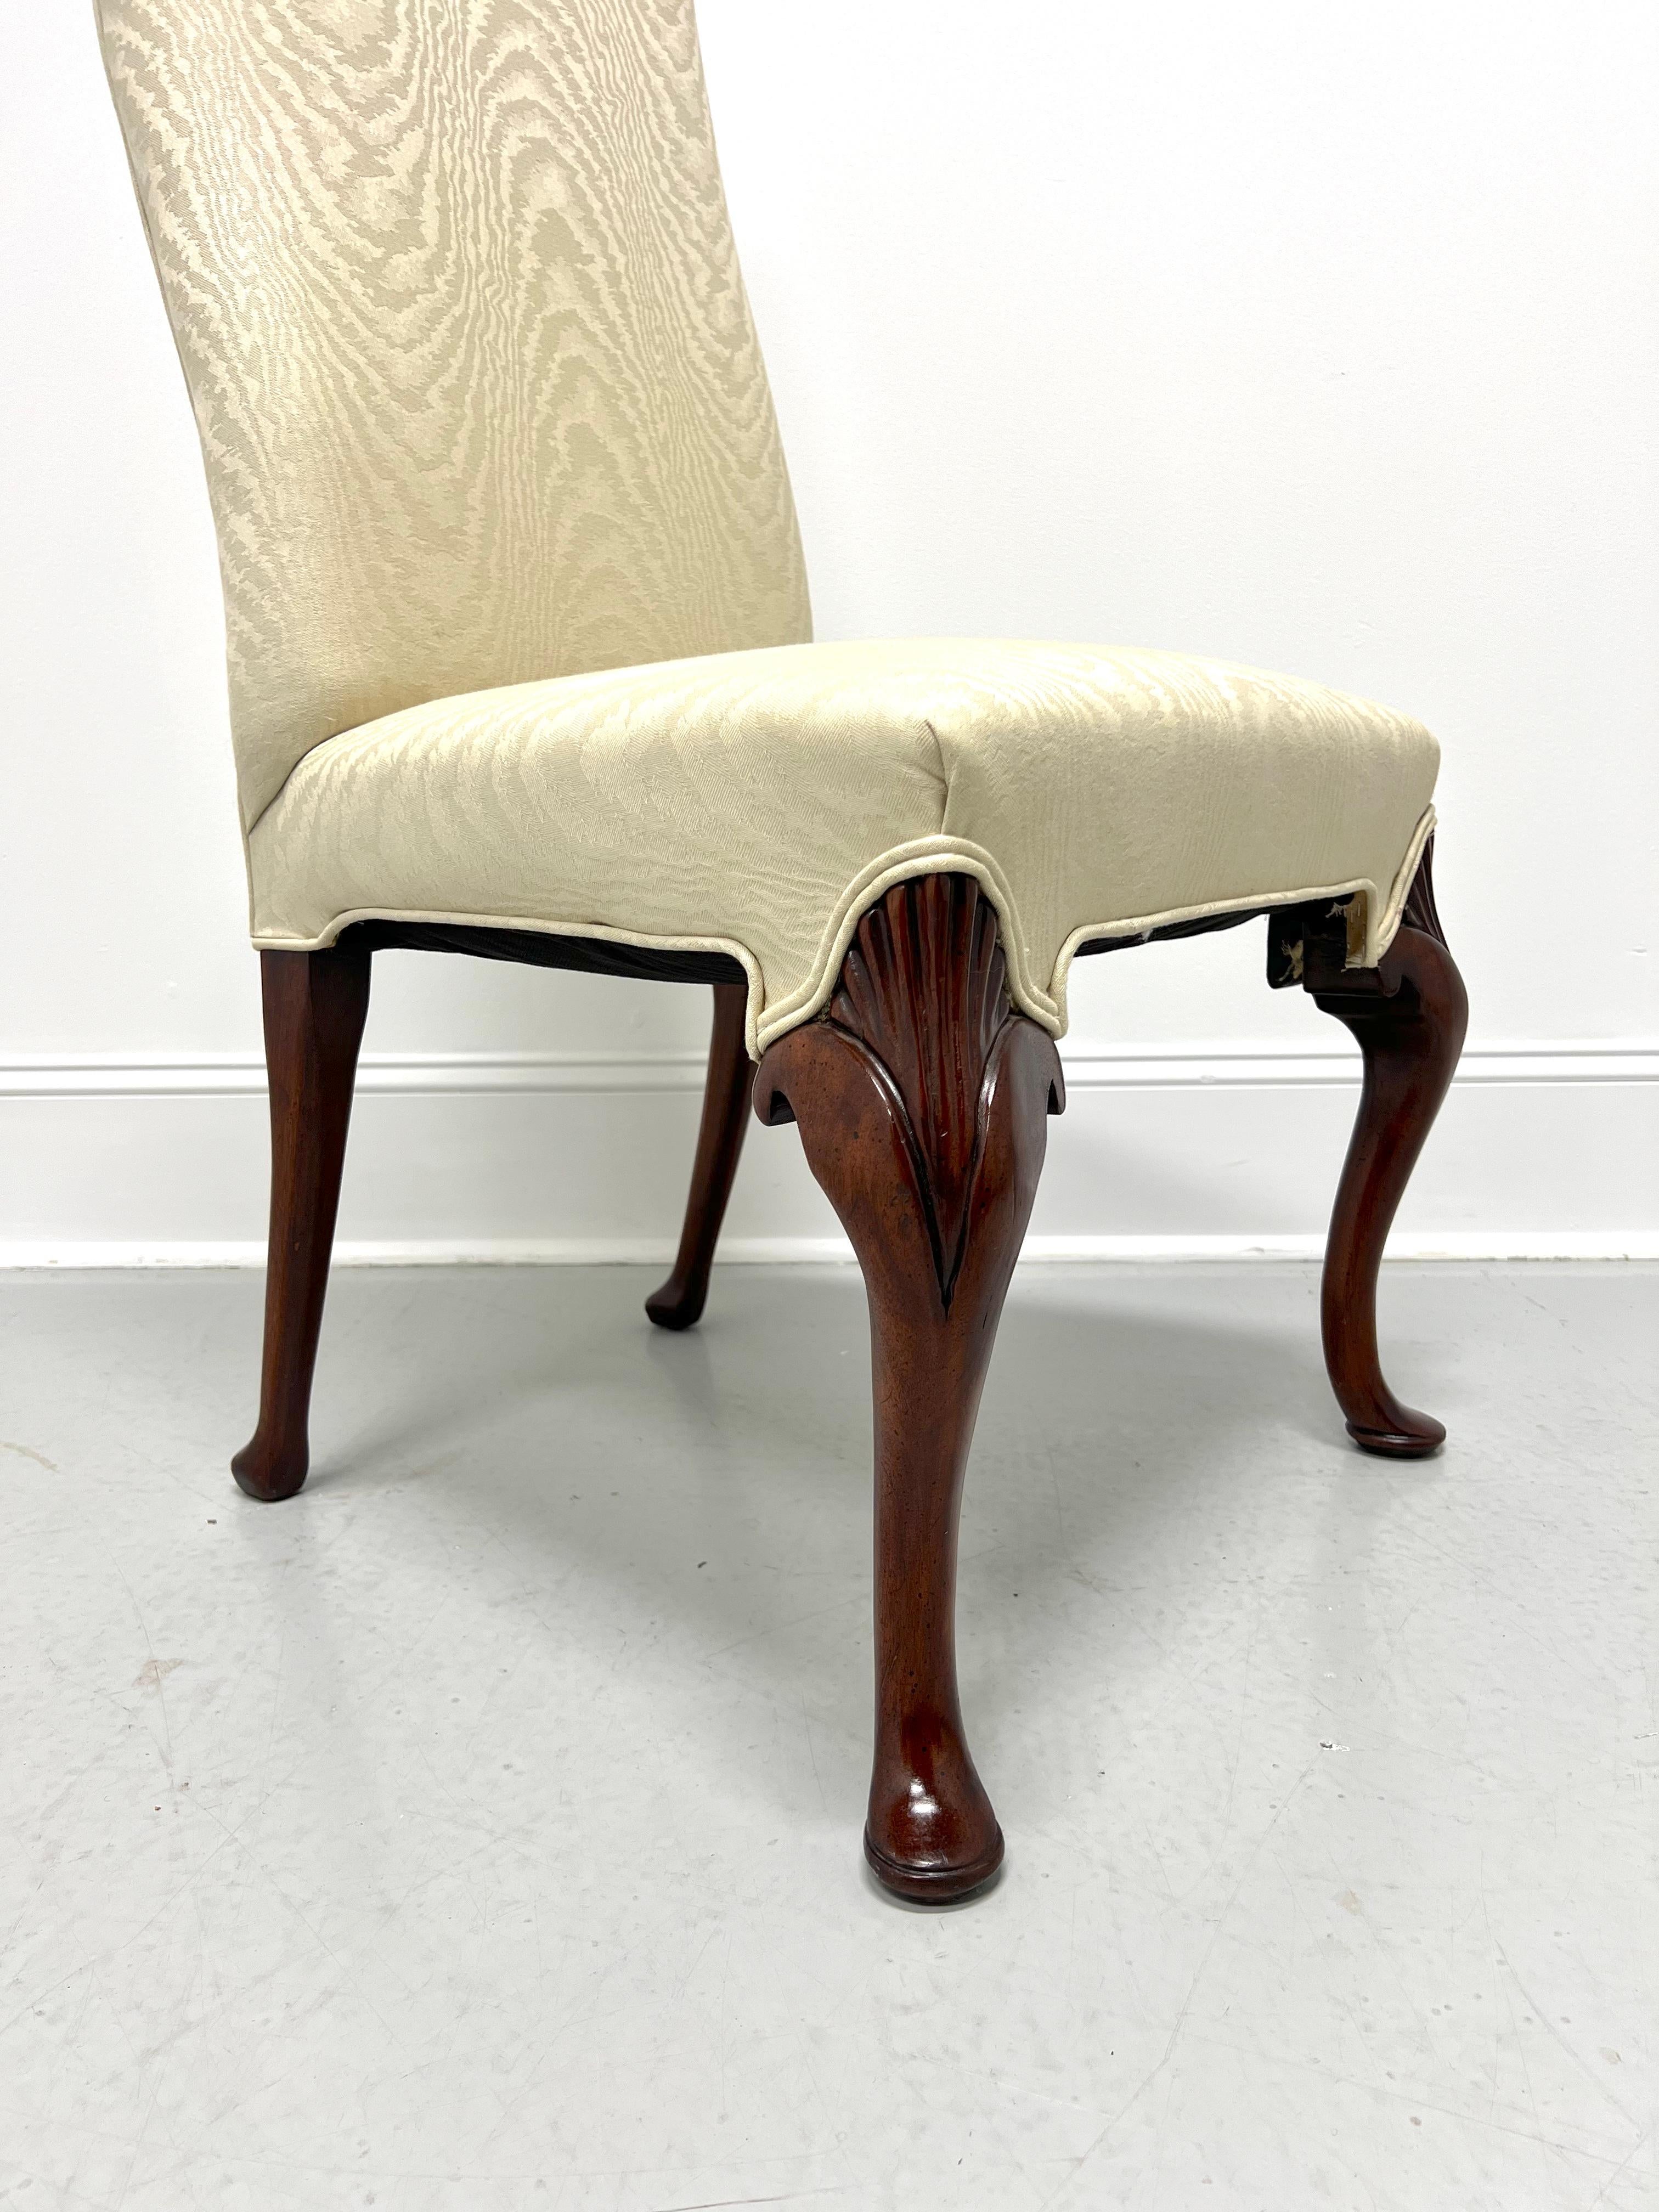 Late 20th Century Mahogany Frame French Provincial Parsons Chairs - Pair For Sale 3